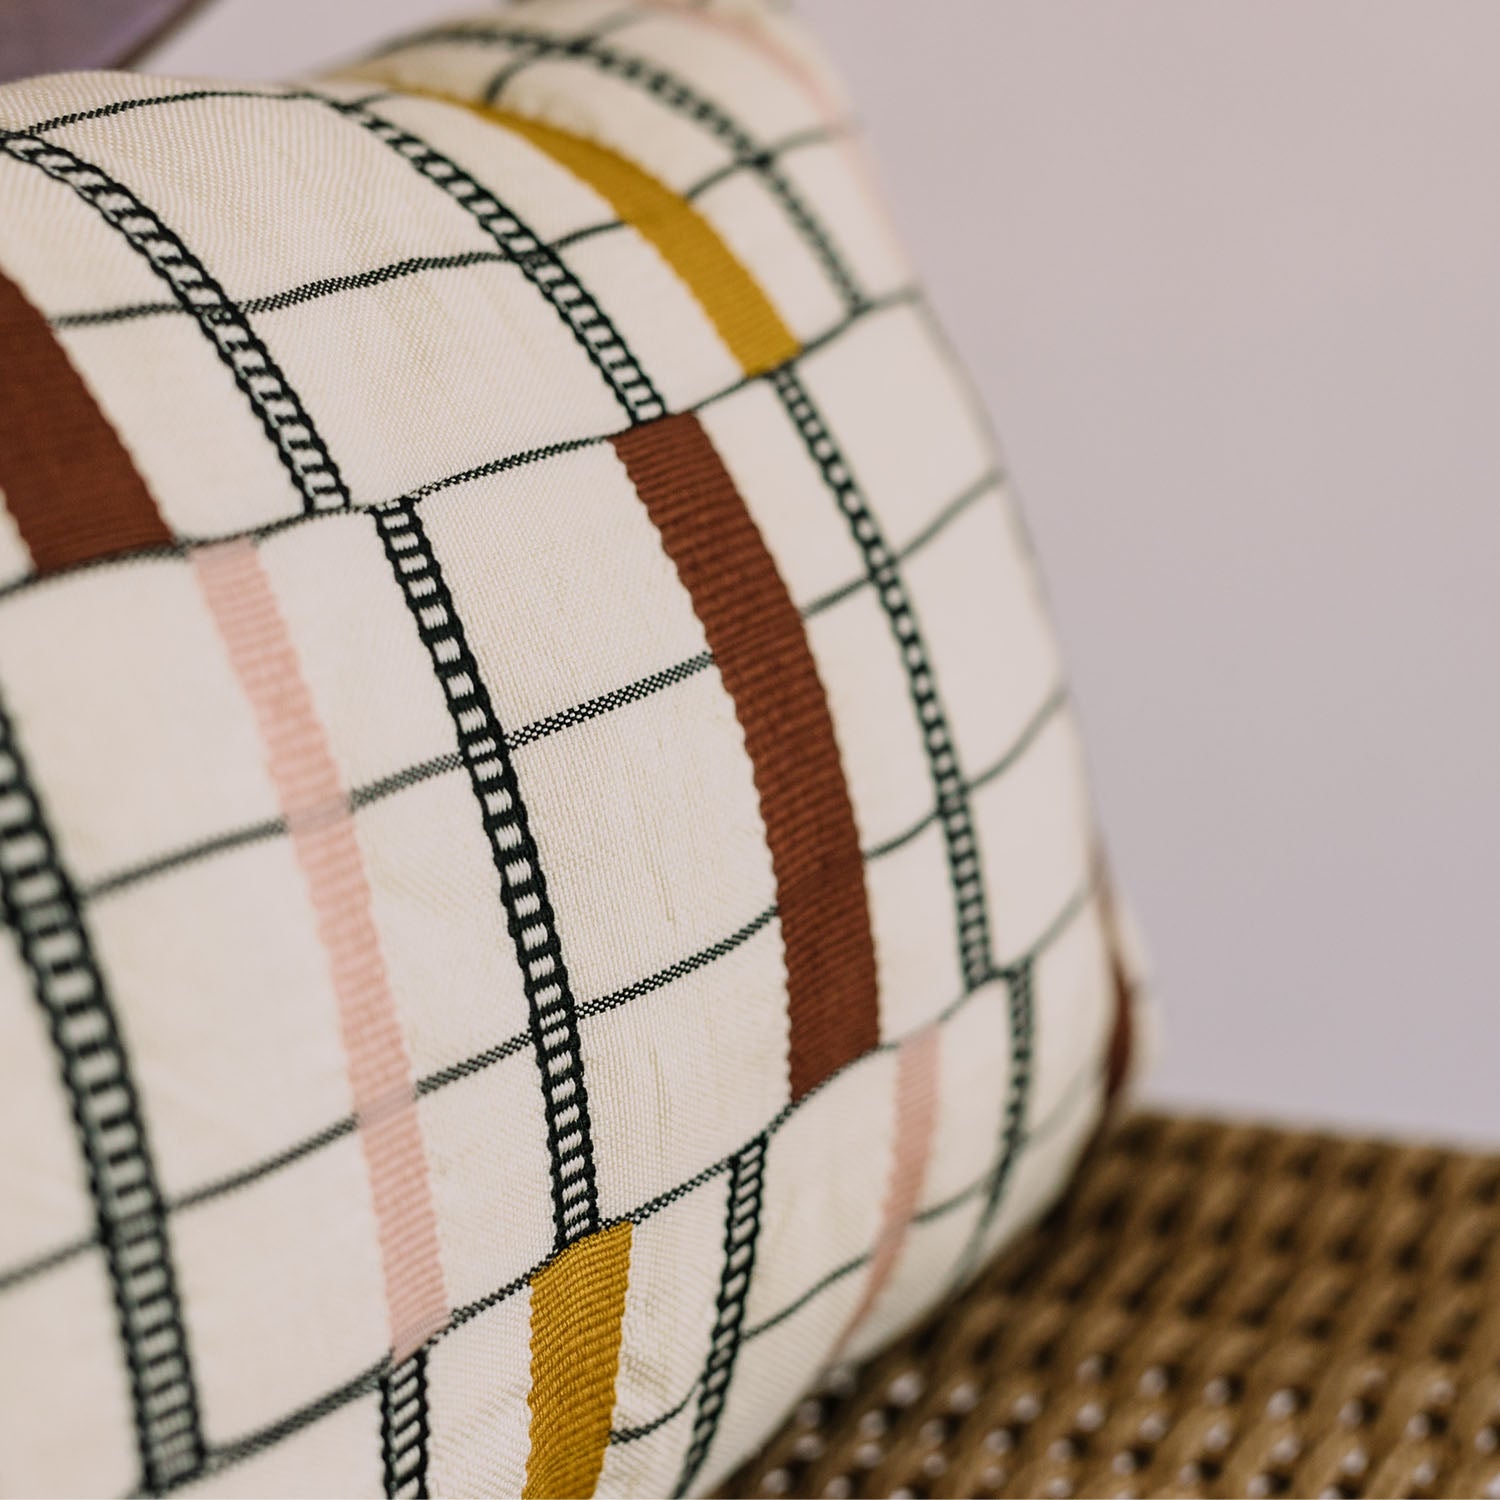 Decorative pillow with geometric pattern in neutral and warm tones.